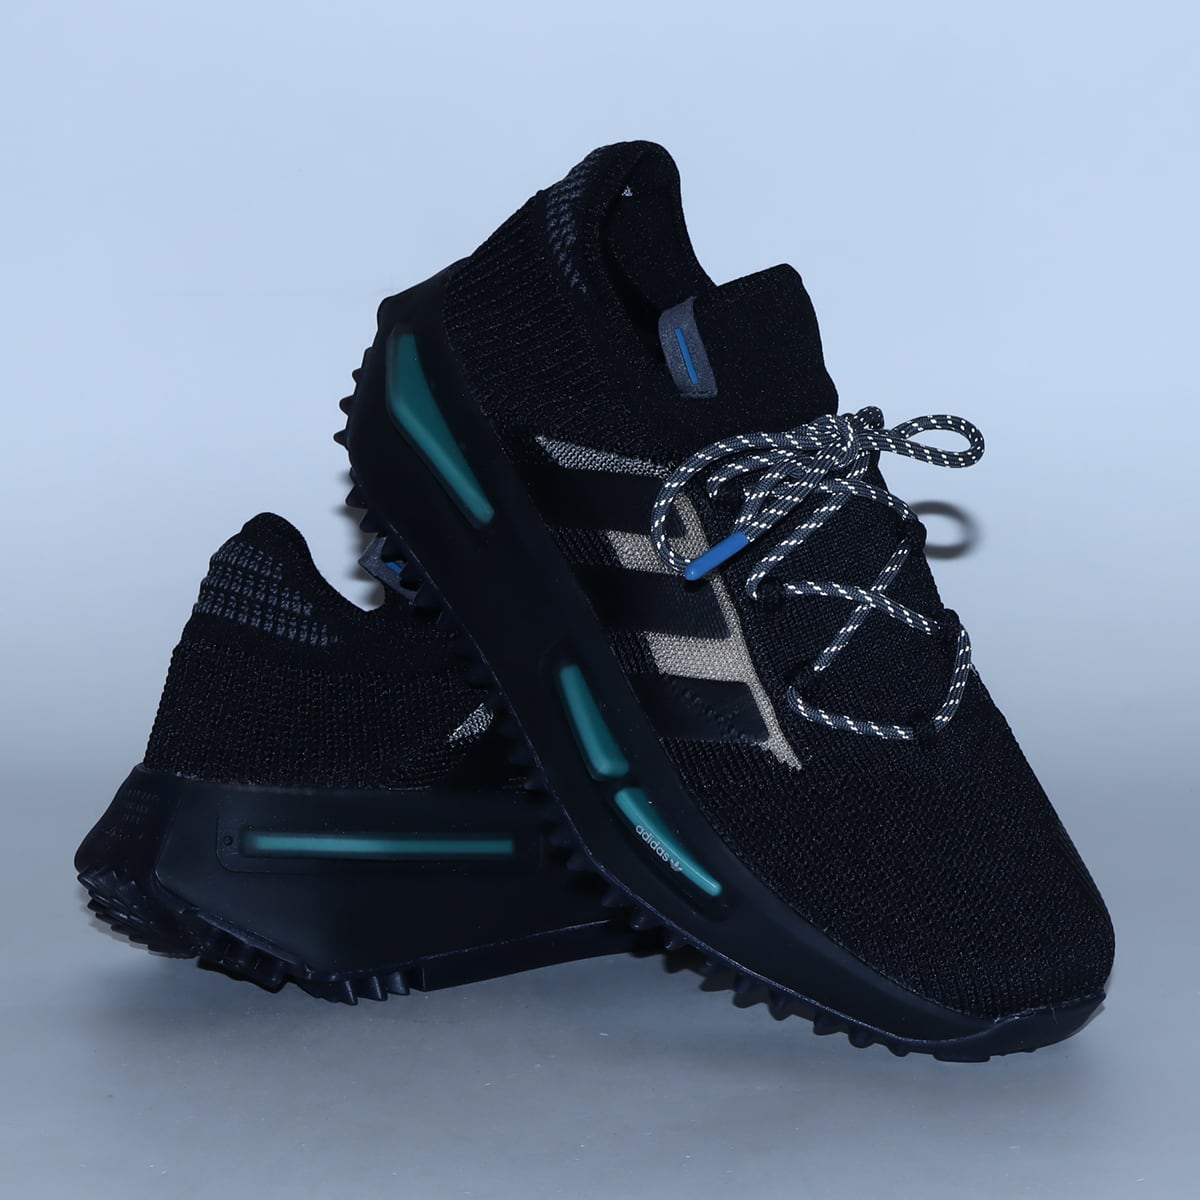 adidas NMD S1 CORE BLACK/CORE BLACK/ALTERED BLUE 22FW-S